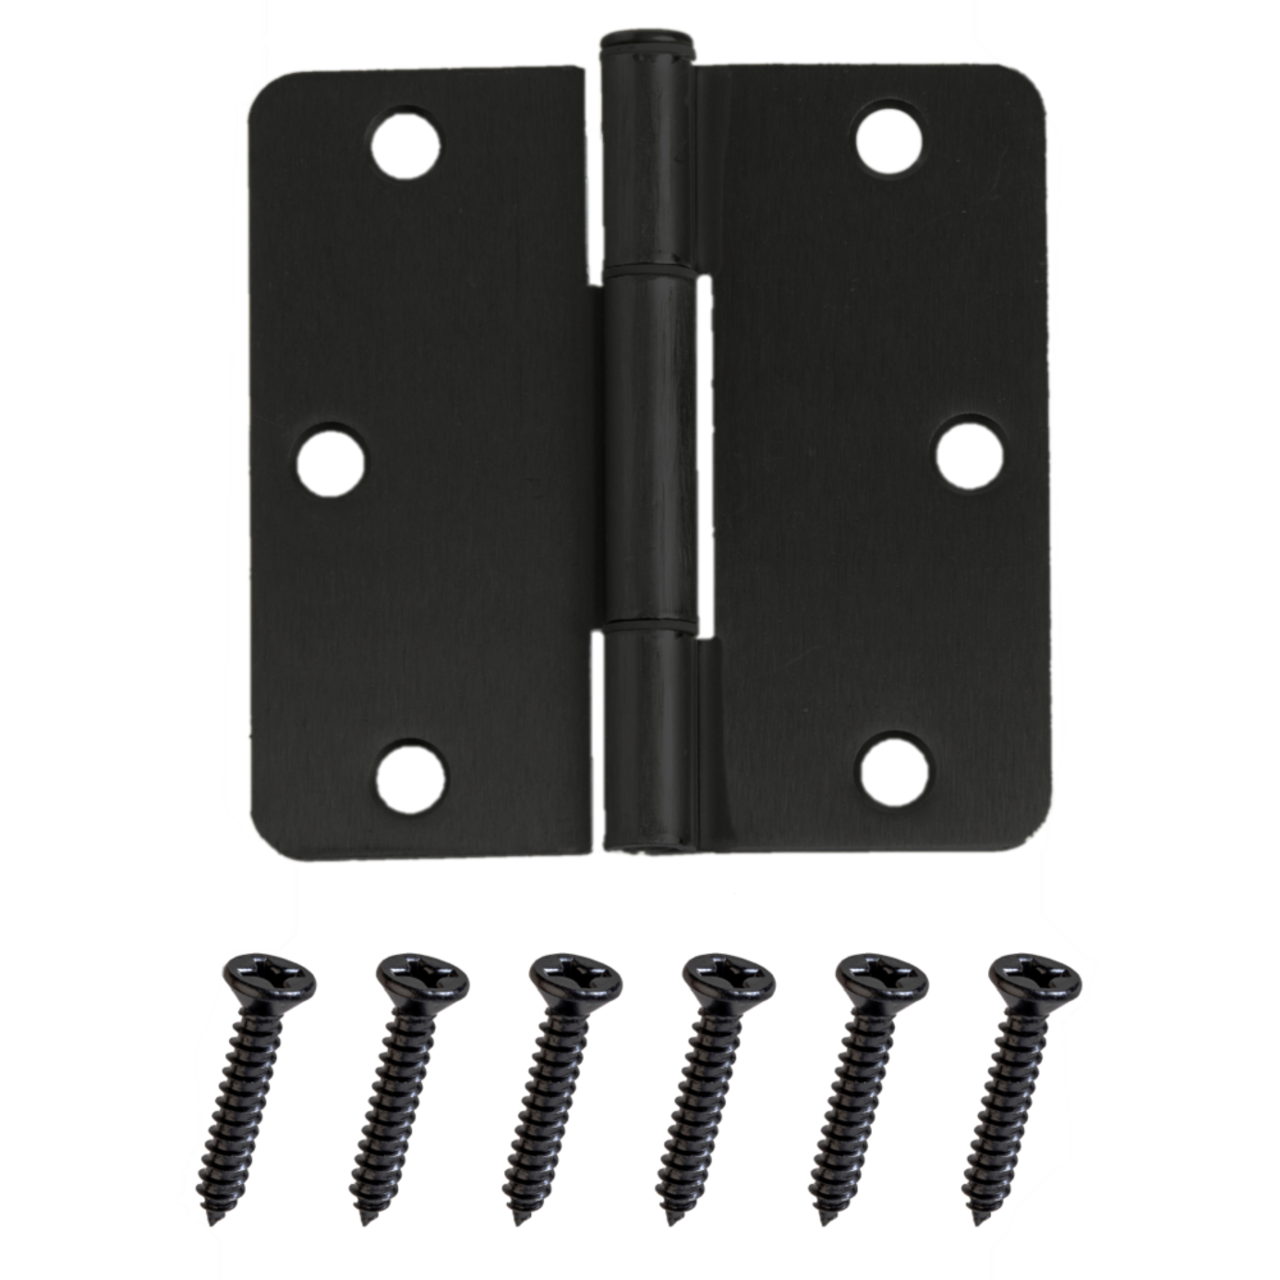 https://media-www.canadiantire.ca/product/fixing/hardware/general-hardware/0463548/hillman-3-1-2-black-door-hinge-with-1-4-radius-1pk-c0c981f9-4874-481c-b53a-b899b9b1a39f.png?imdensity=1&imwidth=640&impolicy=mZoom